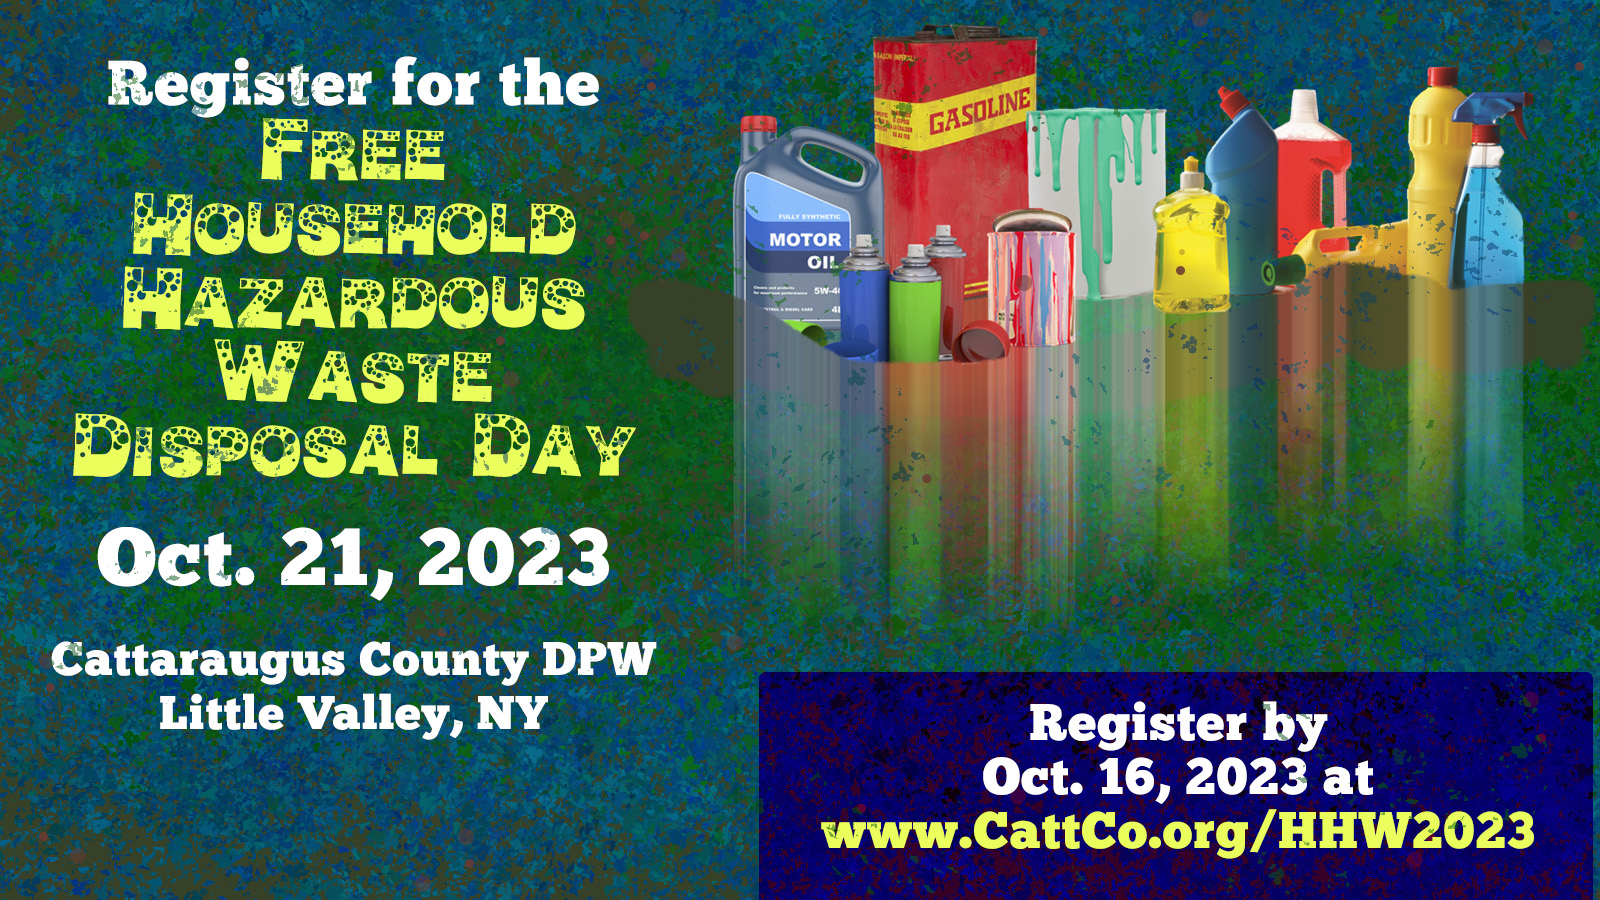 Register by Oct. 16 for the Free Household Hazardous Waste Disposal Day (Oct. 21, 2023) at Catt. County DPW